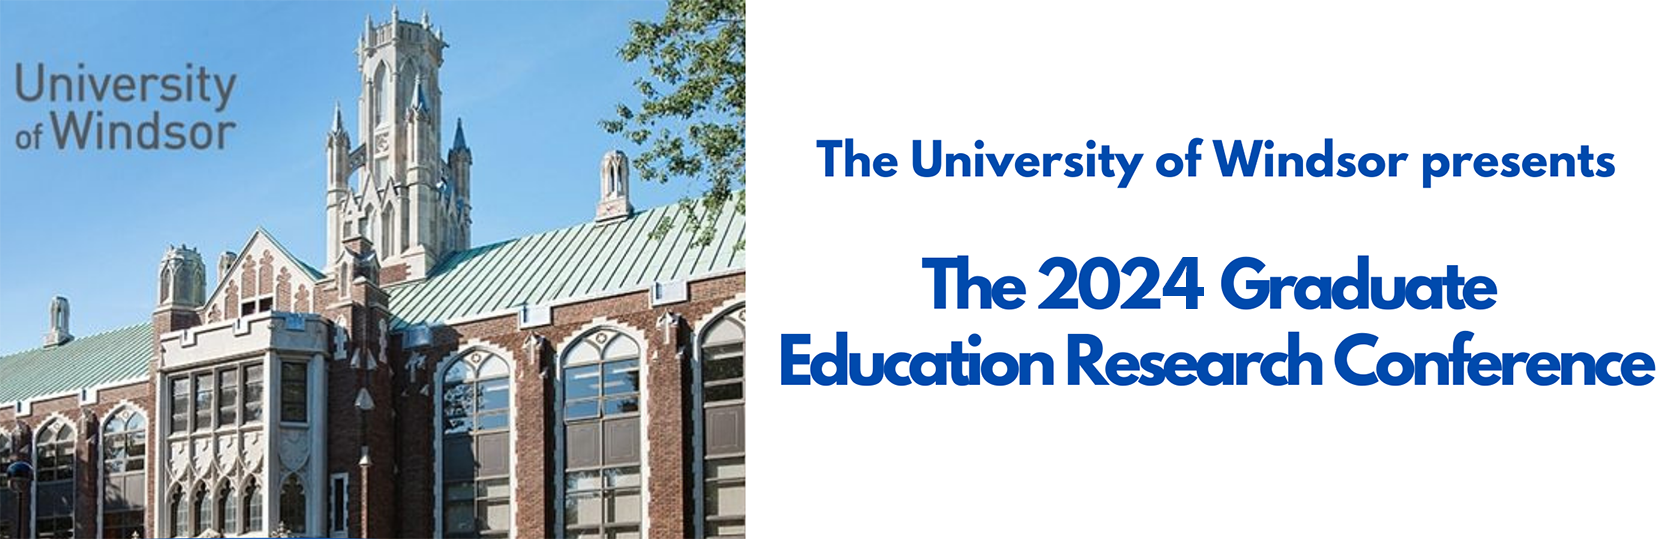 The University of Windsor presents The 2024 Graduate Education Research Conference